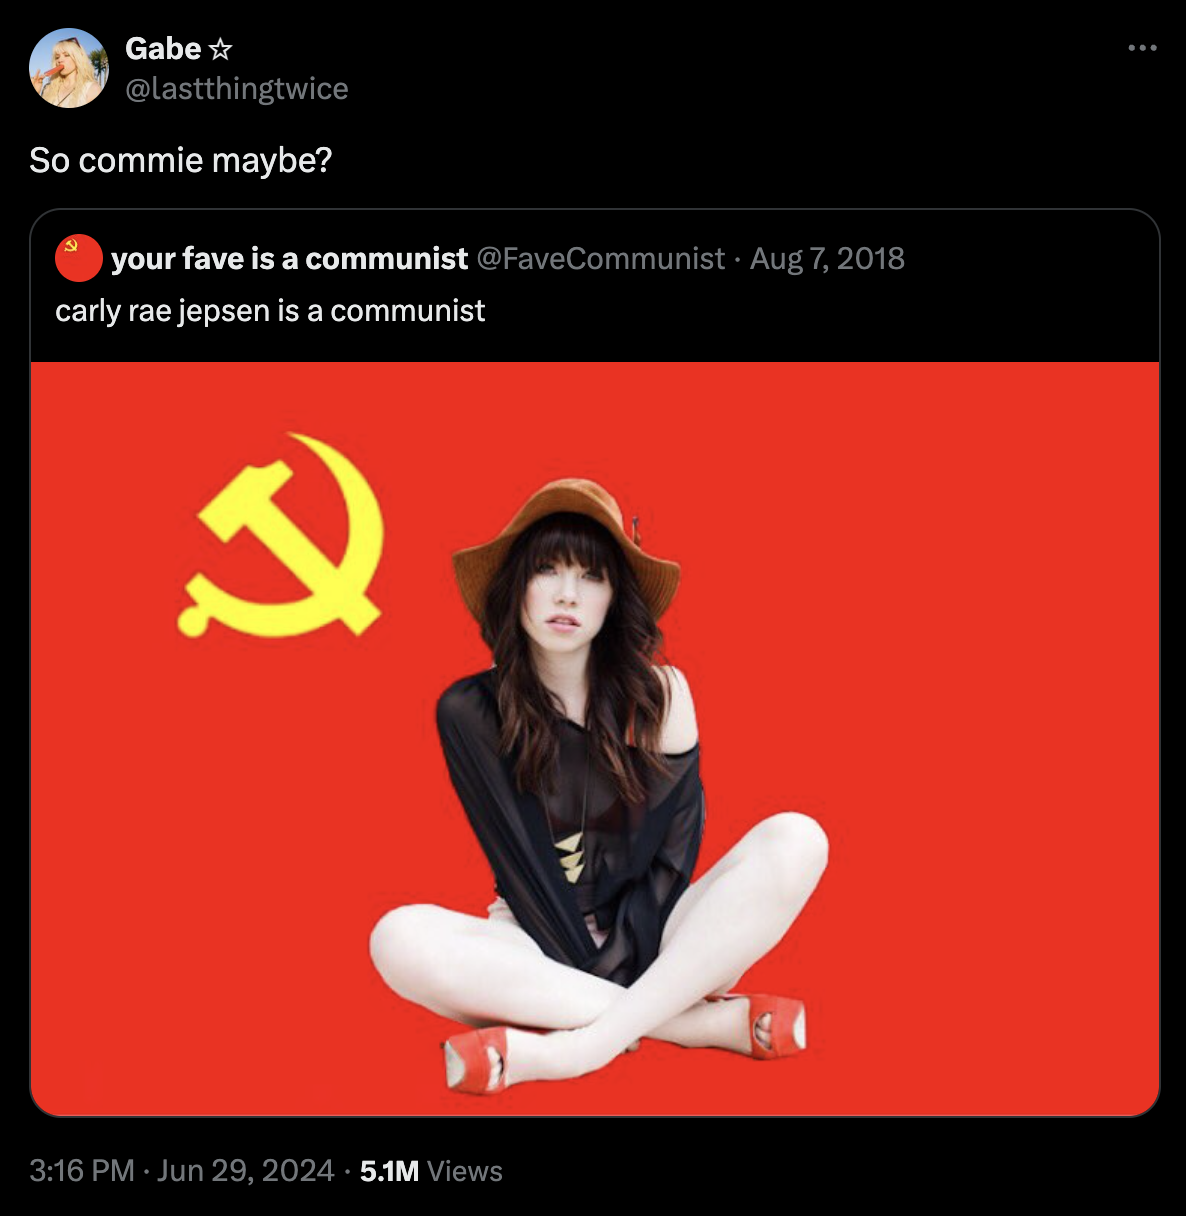 album cover - Gabe So commie maybe? your fave is a communist carly rae jepsen is a communist Q 5.1M Views